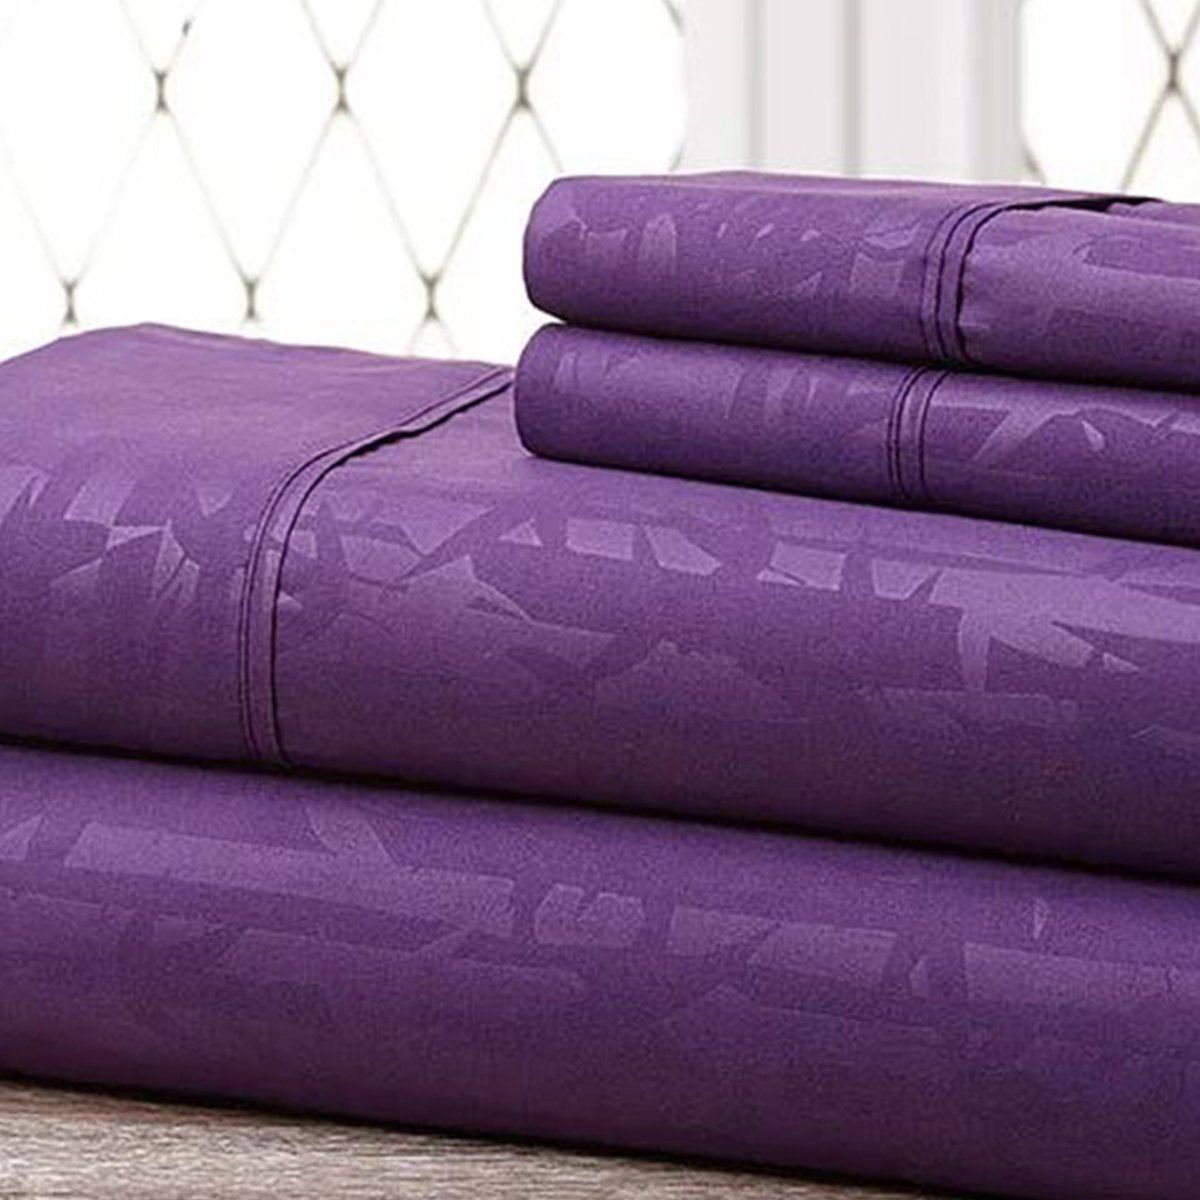 Hny-4pc-eb-pur-k Super-soft 1600 Series Bamboo Embossed Bed Sheet, Purple - King, 4 Piece